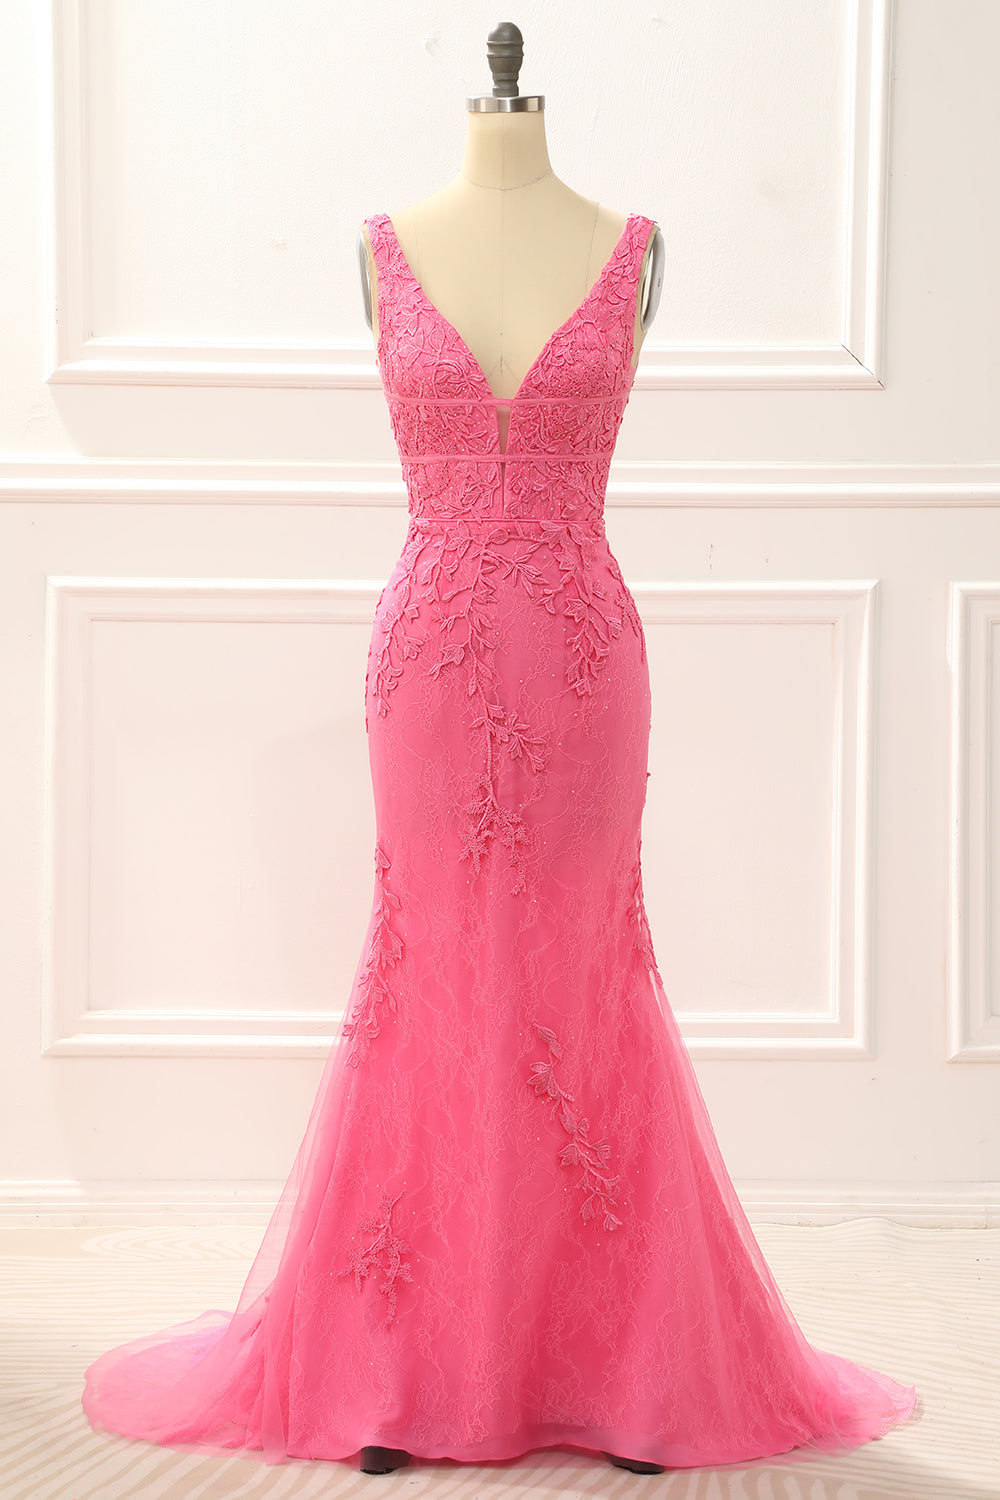 Prom Dress Mermaid, Hot Pink Tulle Mermaid Prom Dress with Appliques